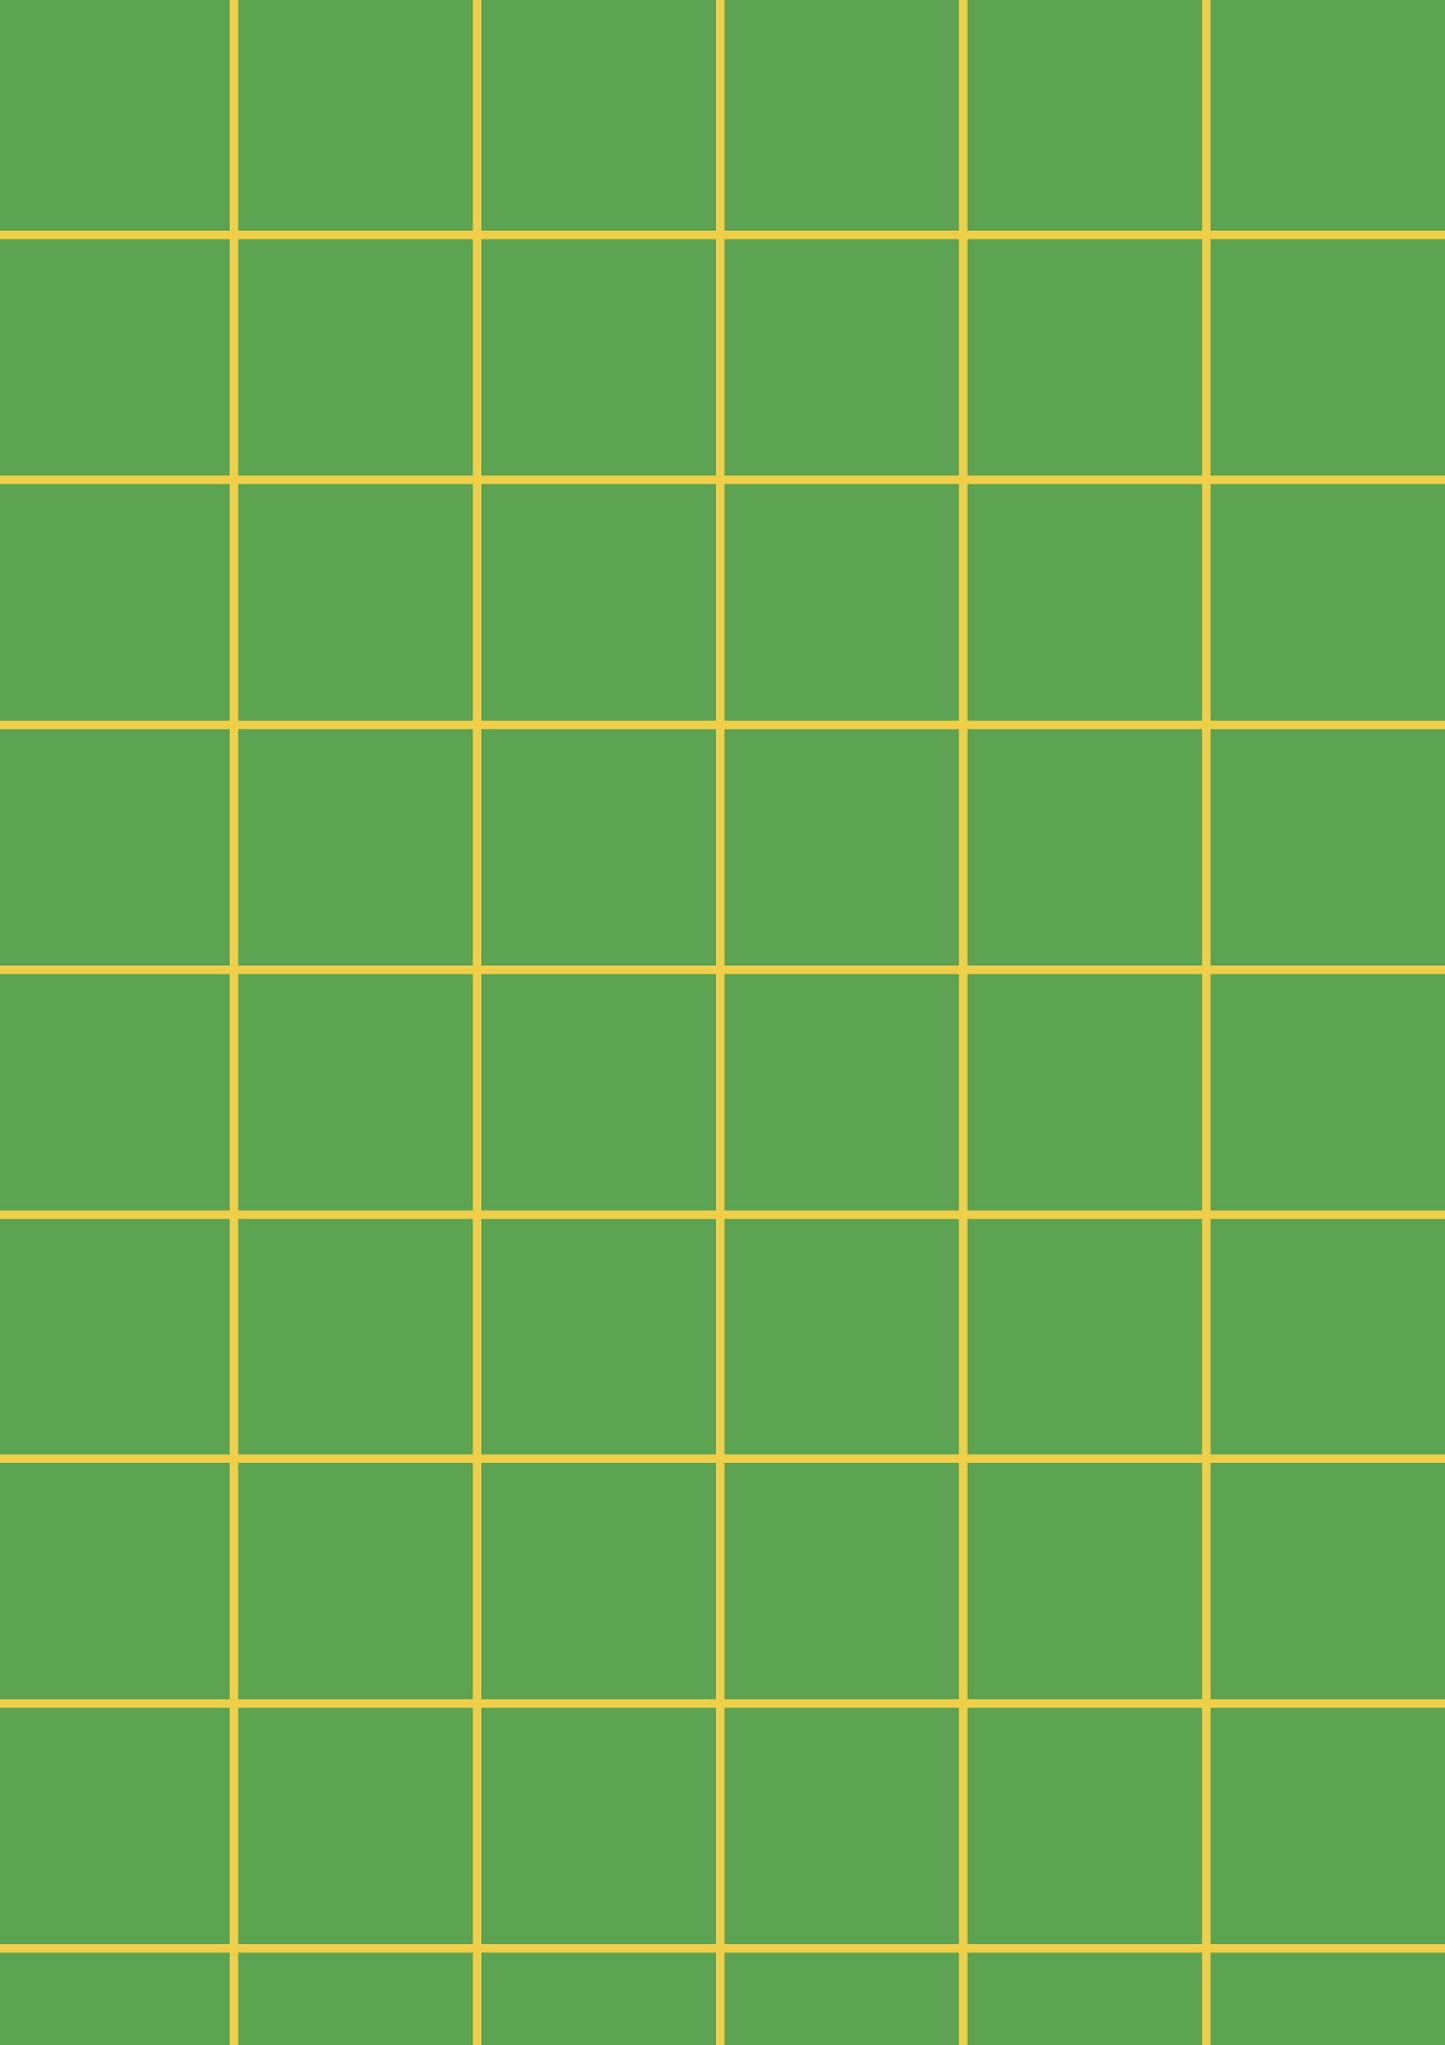 Green A1 Photography Backdrop with Yellow Grid